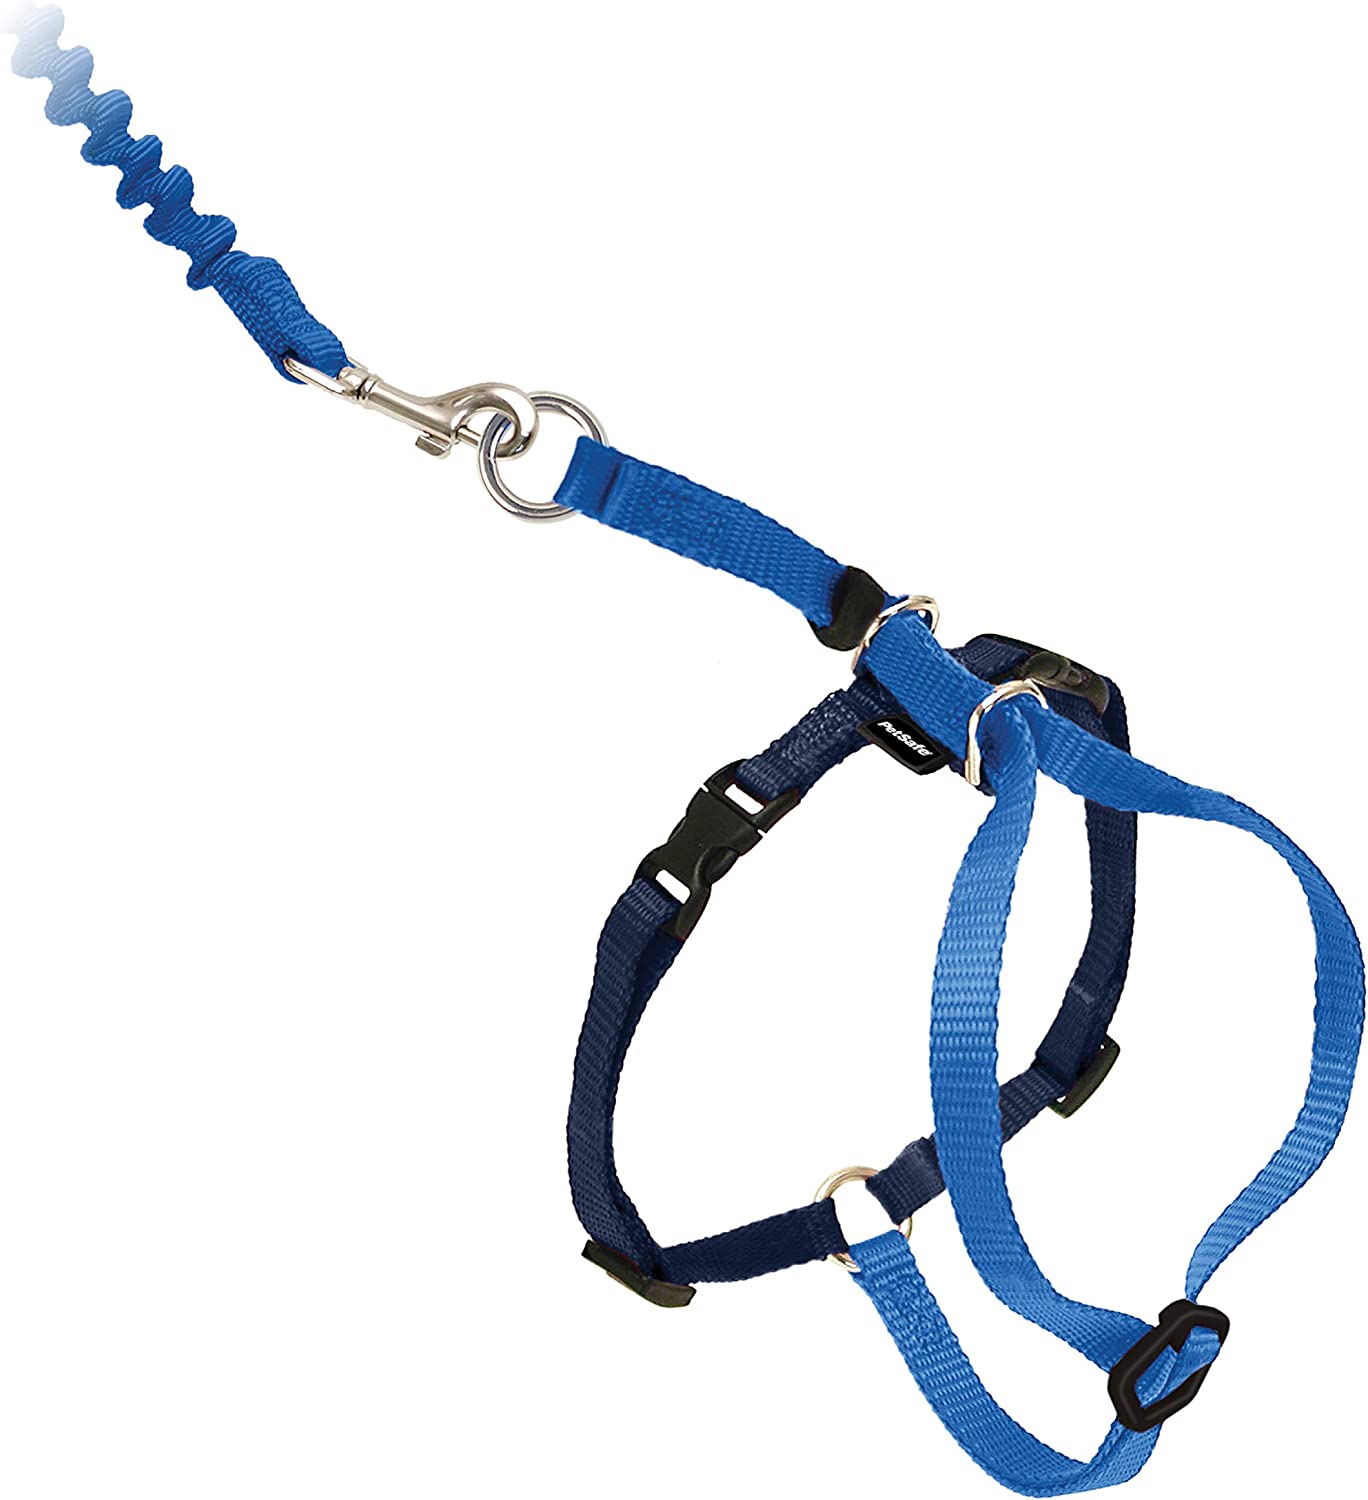 Come with Me Kitty Harness & Bungee Leash Blue